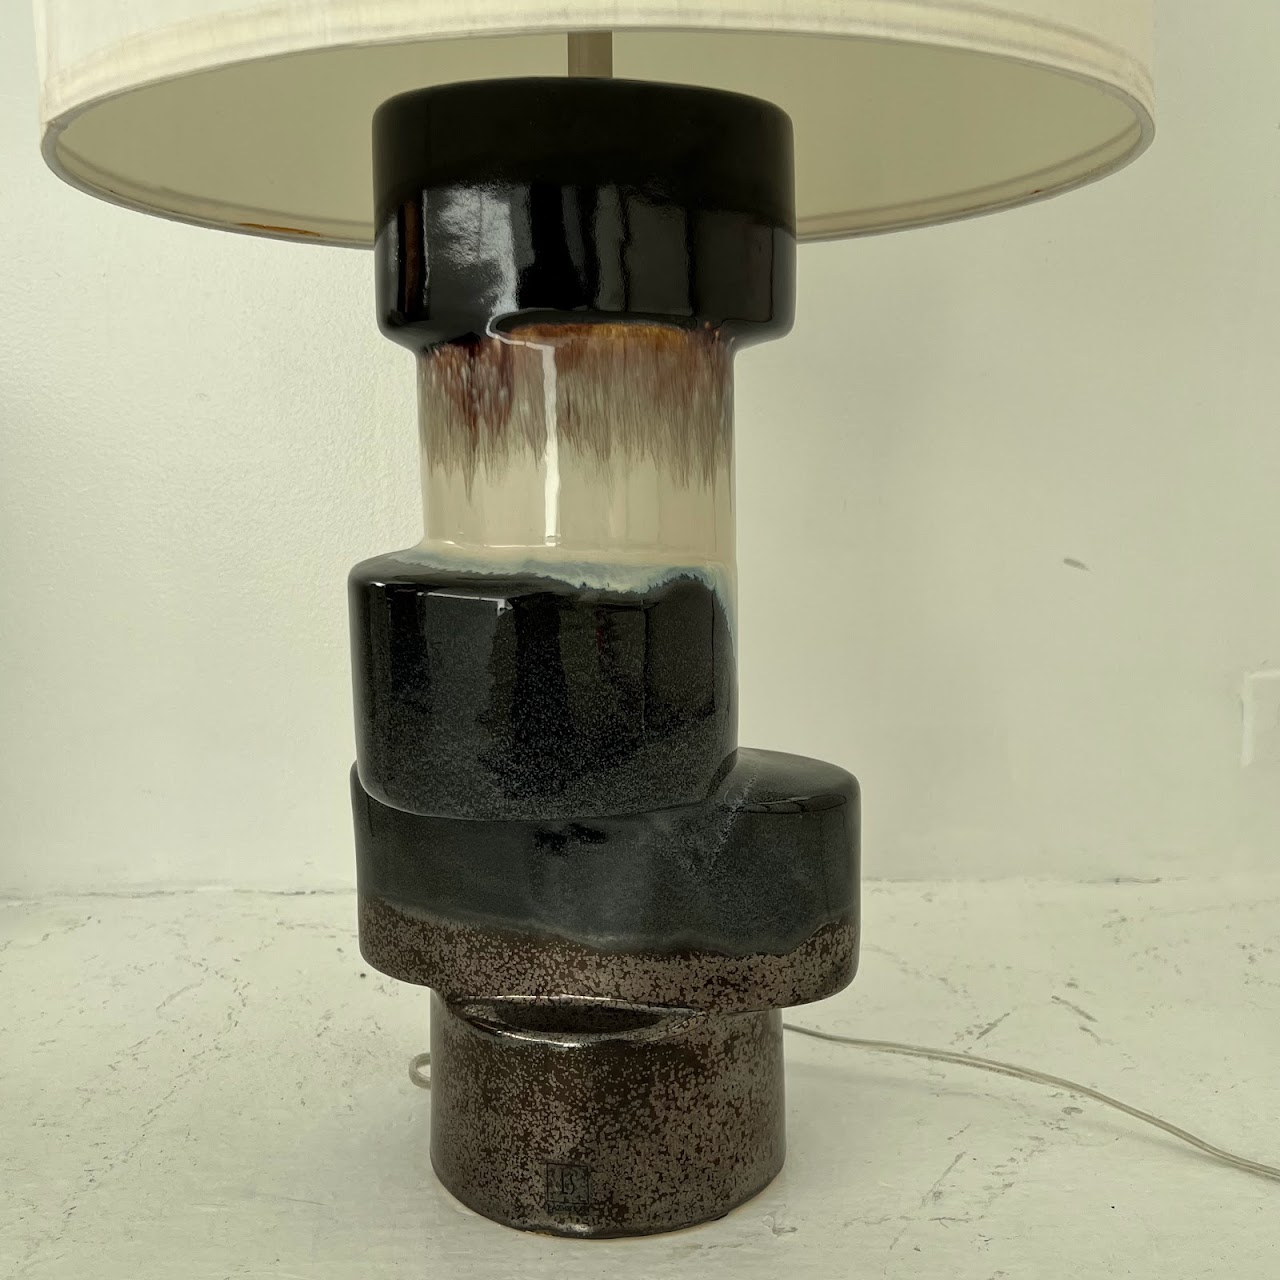 Contemporary Signed Ceramic Table Lamp